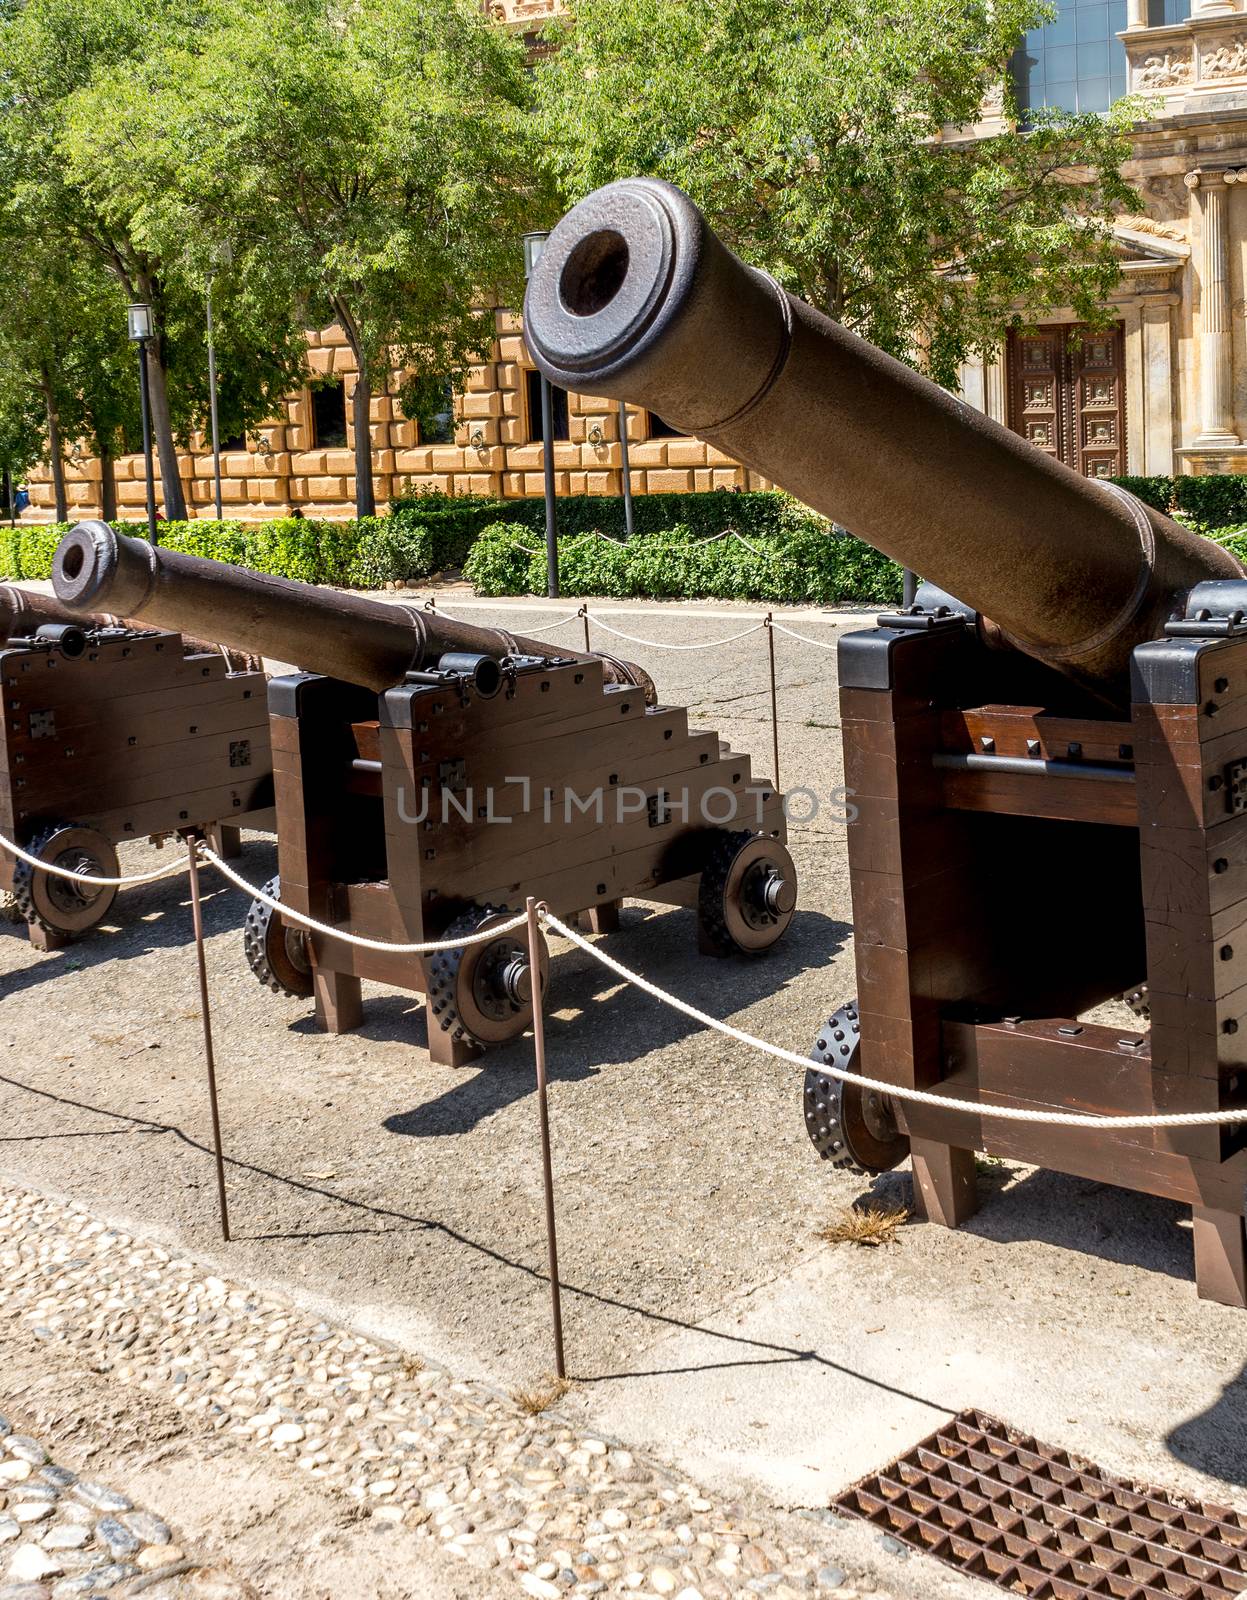 Black cannon at the Alhambra palace in Granada, Spain, Europe by ramana16